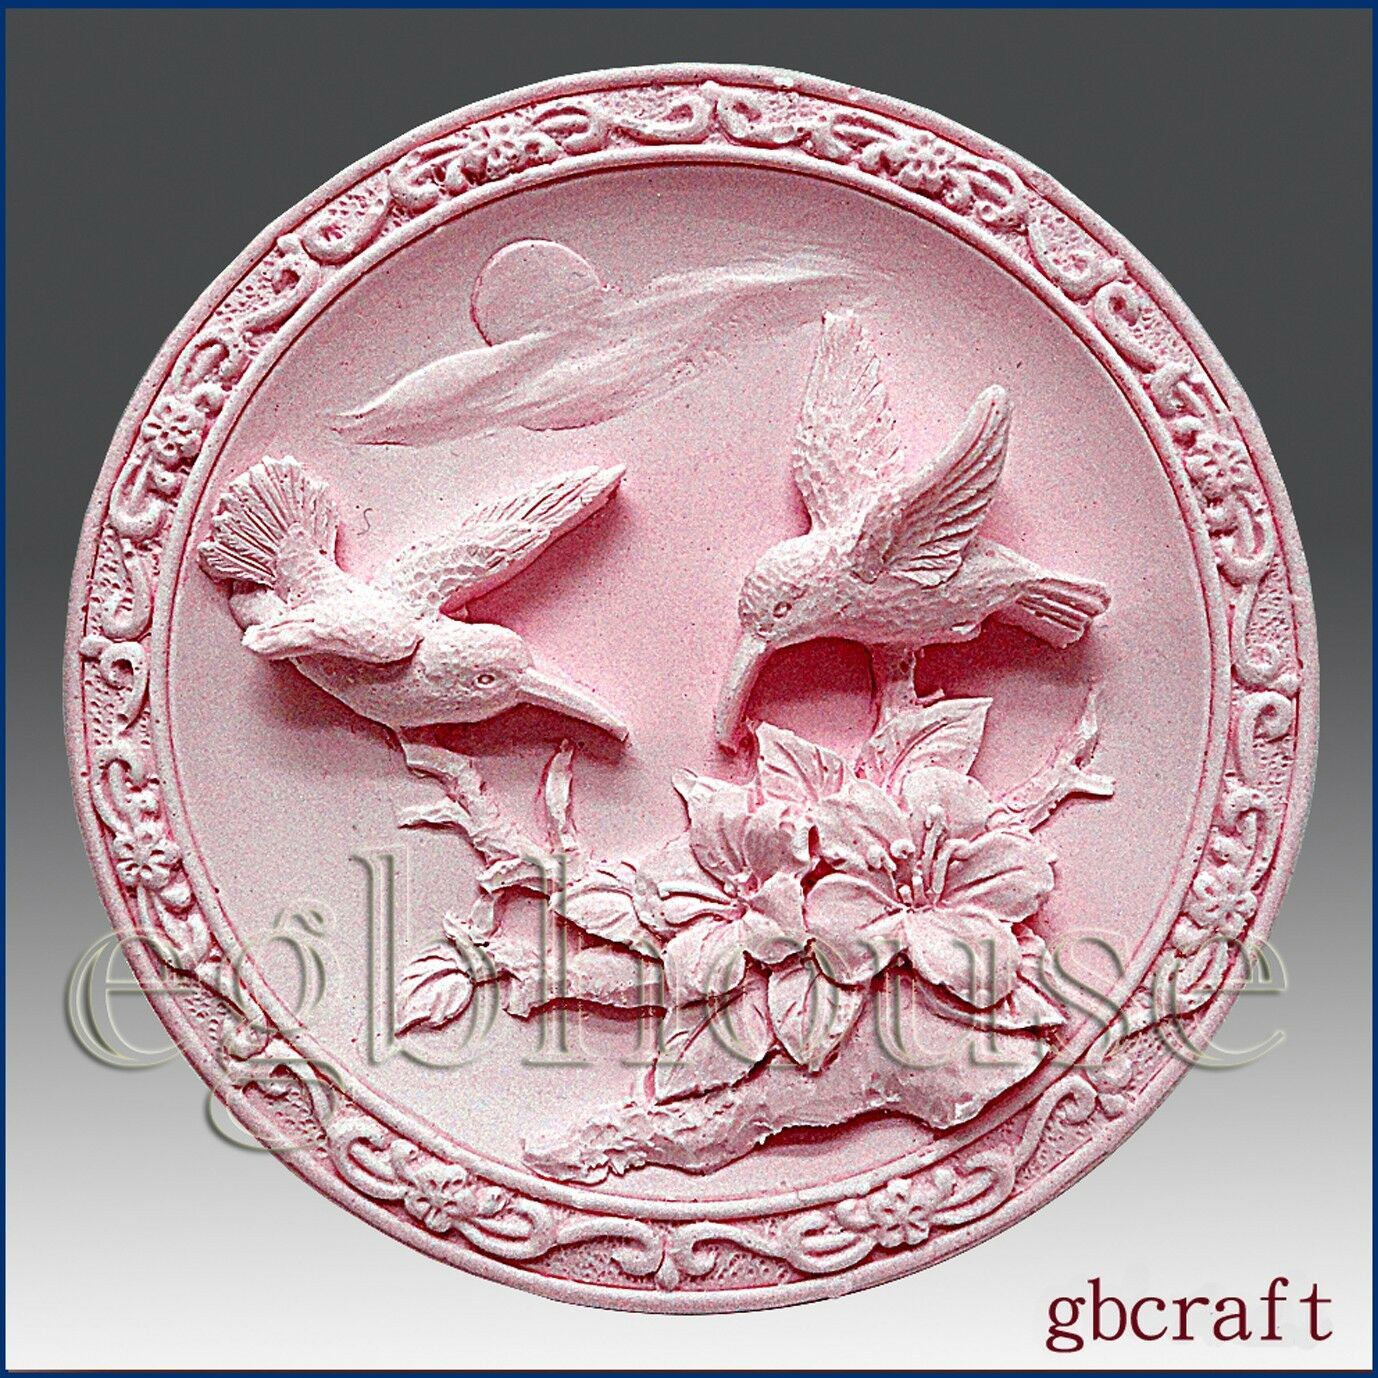 Primary image for 2D Silicone Soap Mold – Birds in Scarlet Pimpernel garden